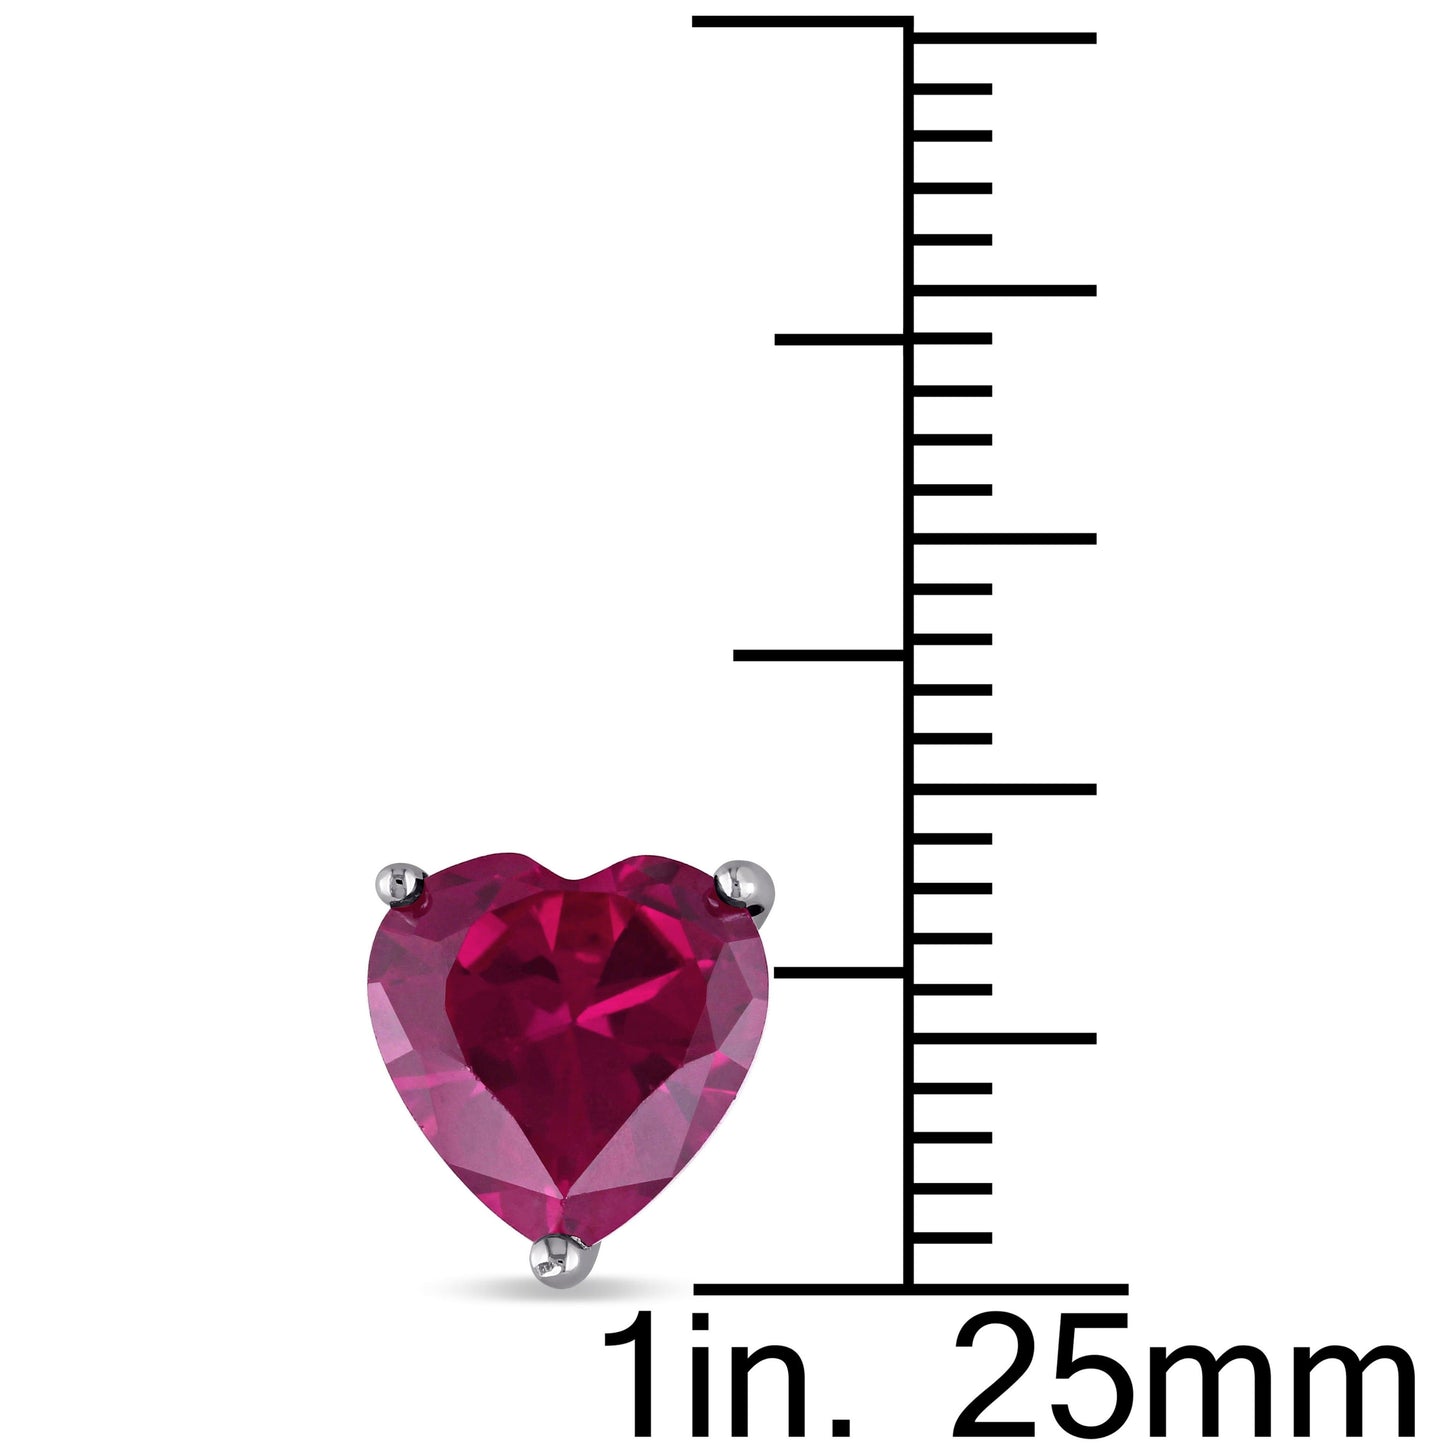 5.68ct Ruby Heart Studs in Sterling Silver